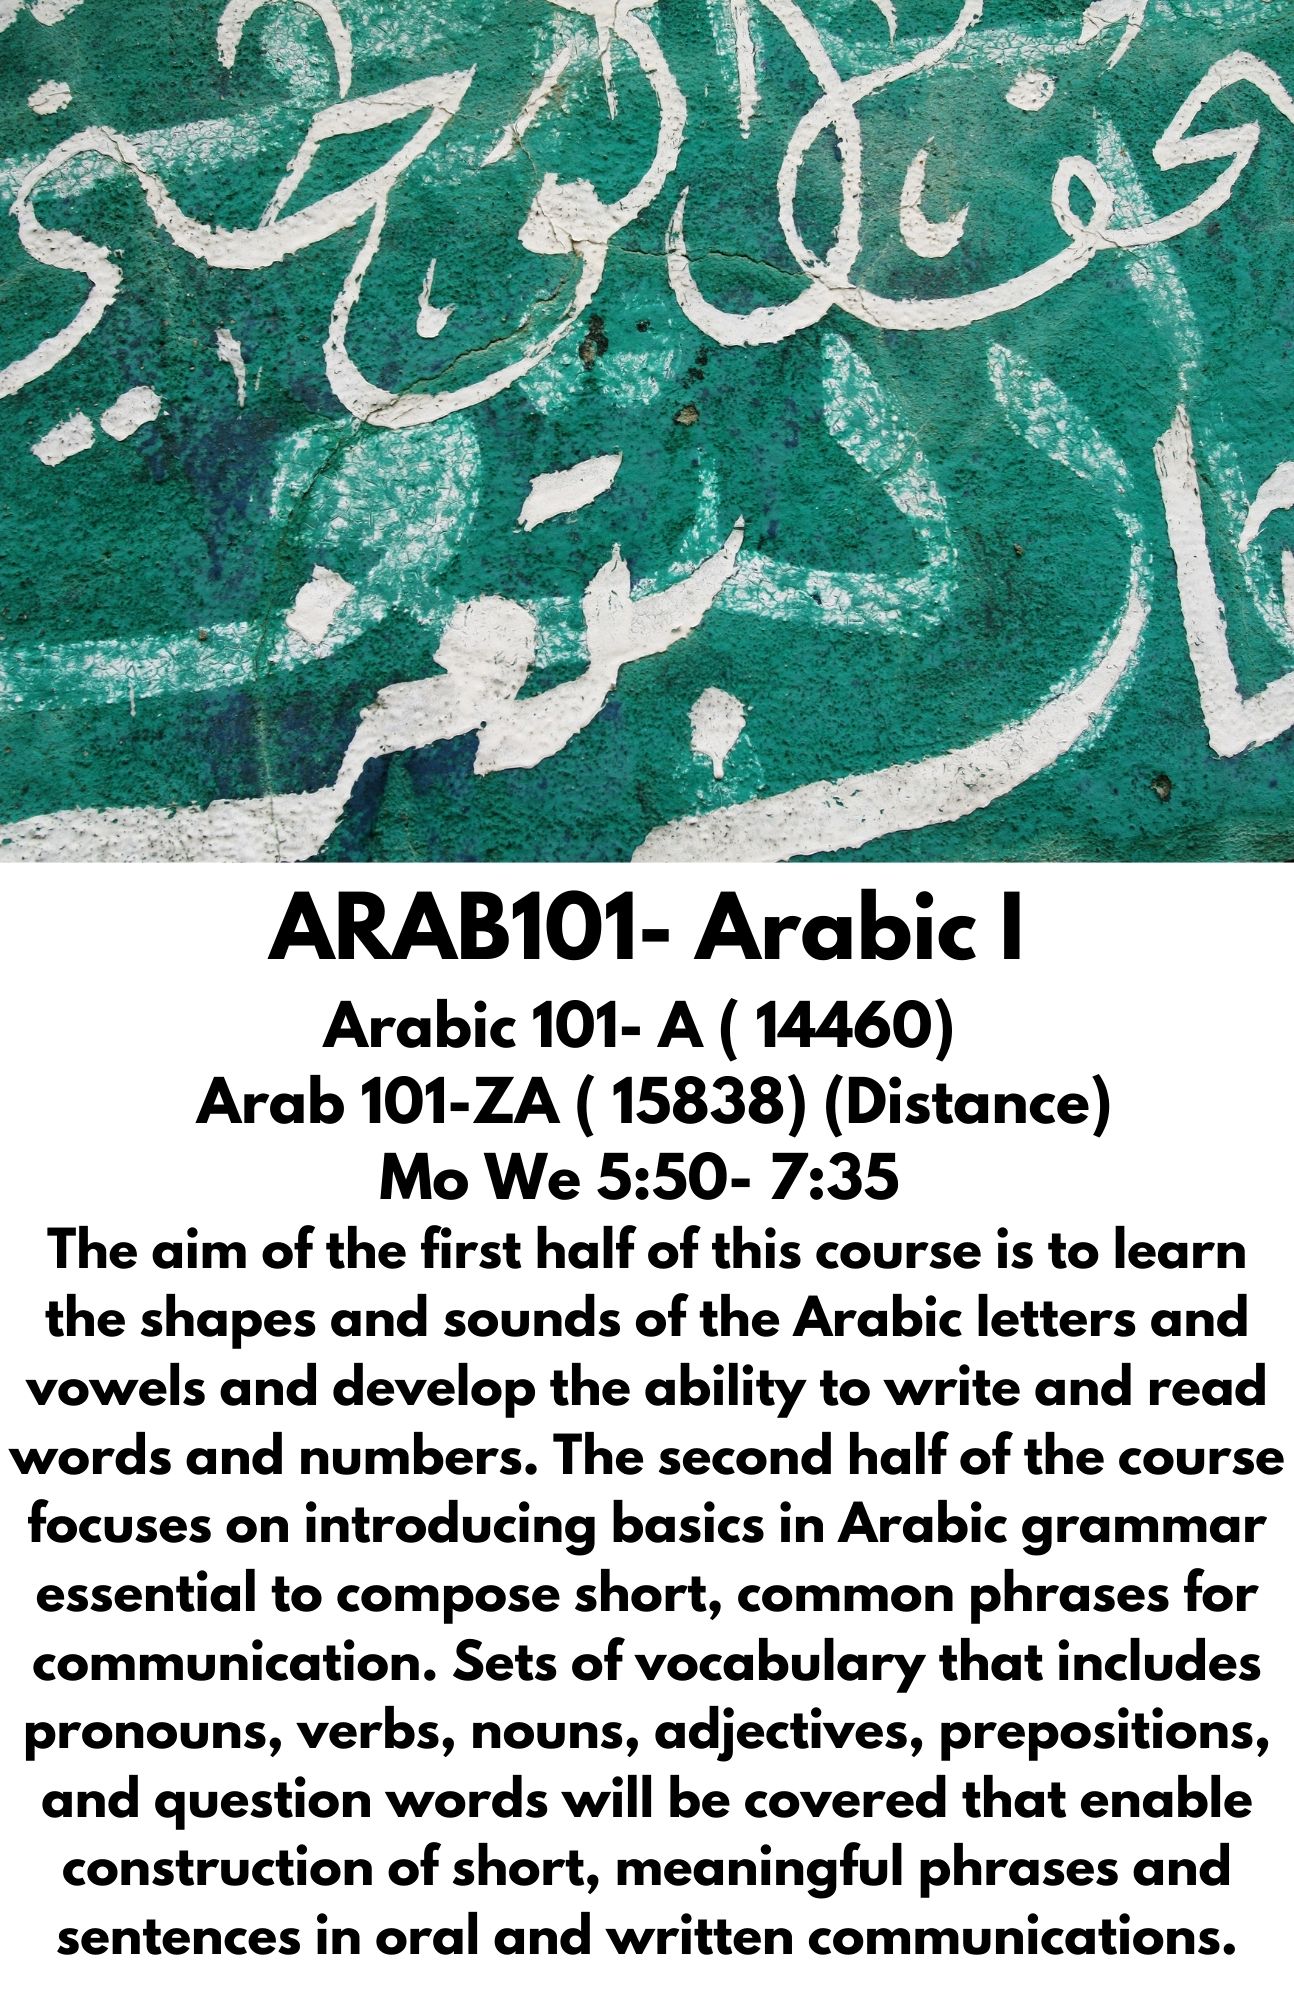 ARAB101- Arabic I Arabic 101- A ( 14460)   Arab 101-ZA ( 15838) (Distance) Mo We 5:50- 7:35  The aim of the first half of this course is to learn the shapes and sounds of the Arabic letters and vowels and develop the ability to write and read words and numbers. The second half of the course focuses on introducing basics in Arabic grammar essential to compose short, common phrases for communication. Sets of vocabulary that includes pronouns, verbs, nouns, adjectives, prepositions, and question words will be covered that enable construction of short, meaningful phrases and sentences in oral and written communications.